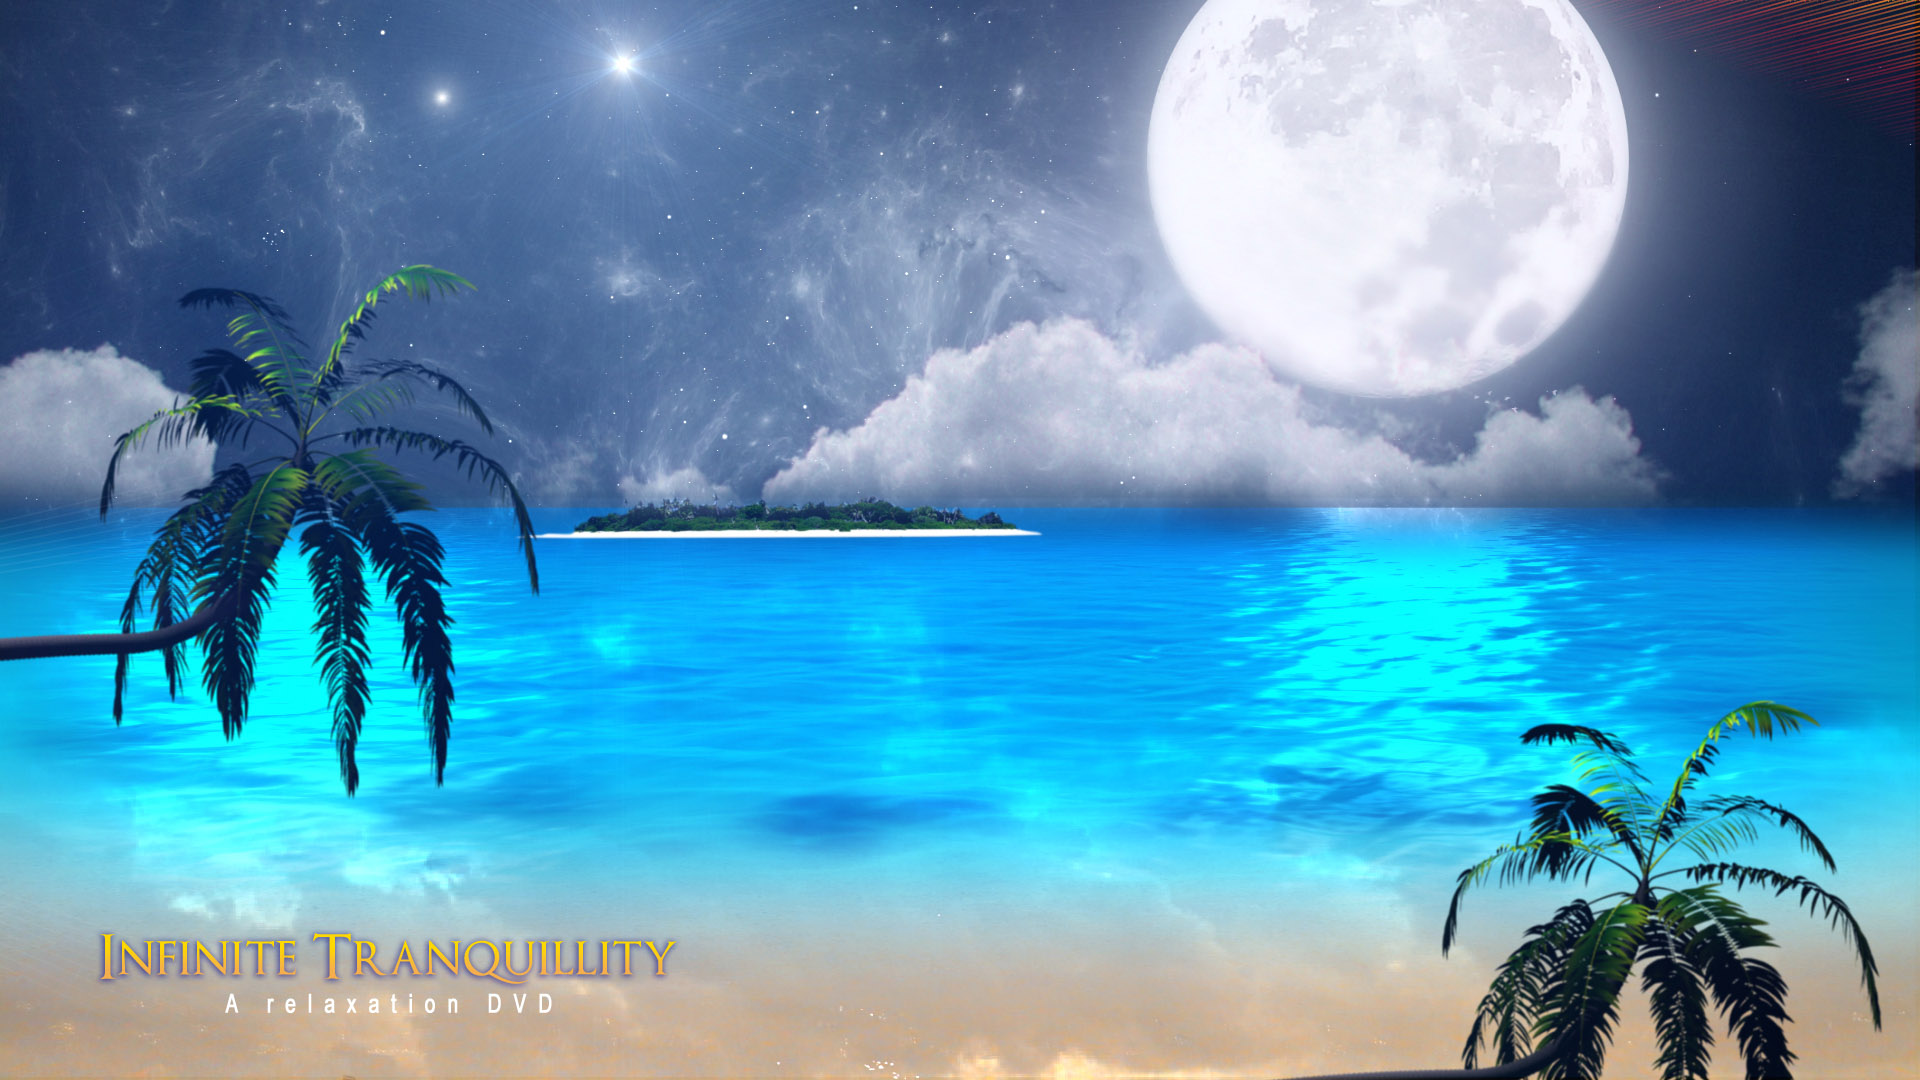 🔥 Download Infinite Tranquility Relaxation Wallpaper By Vincentwalker Relaxing Beach